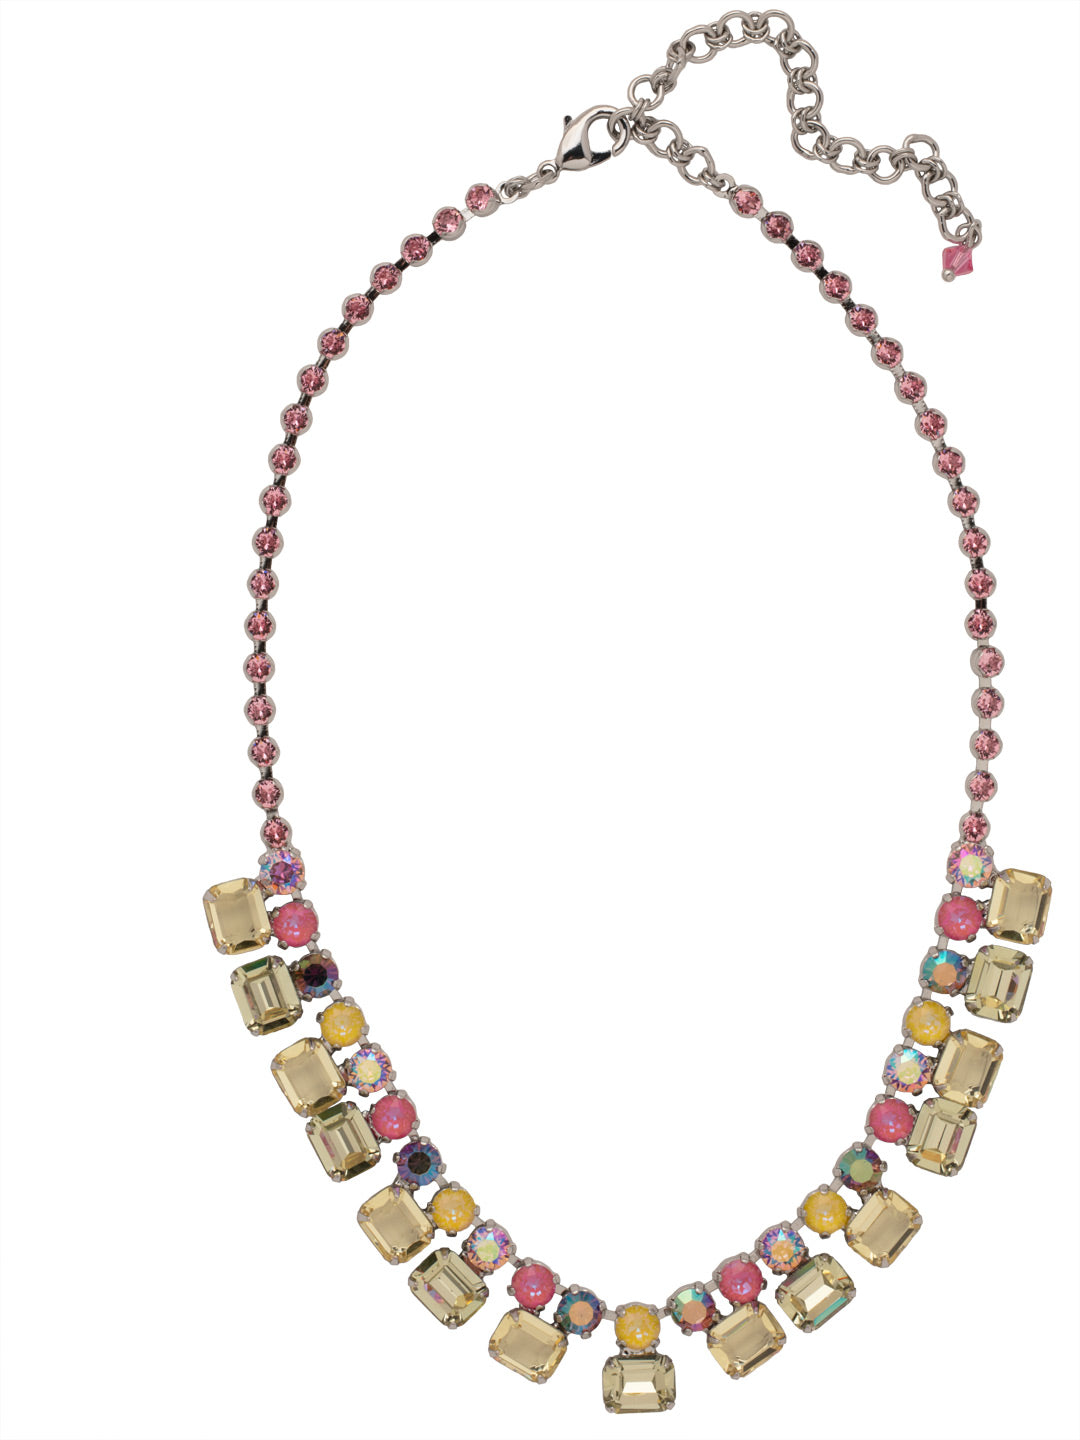 Bessie Tennis Necklace - NFF42PDPPN - <p>The Bessie Tennis Necklace features a sparkling assortment of round and octagon cut crystals on an adjustable crystal embellished chain, secured by a lobster claw clasp. From Sorrelli's Pink Pineapple collection in our Palladium finish.</p>